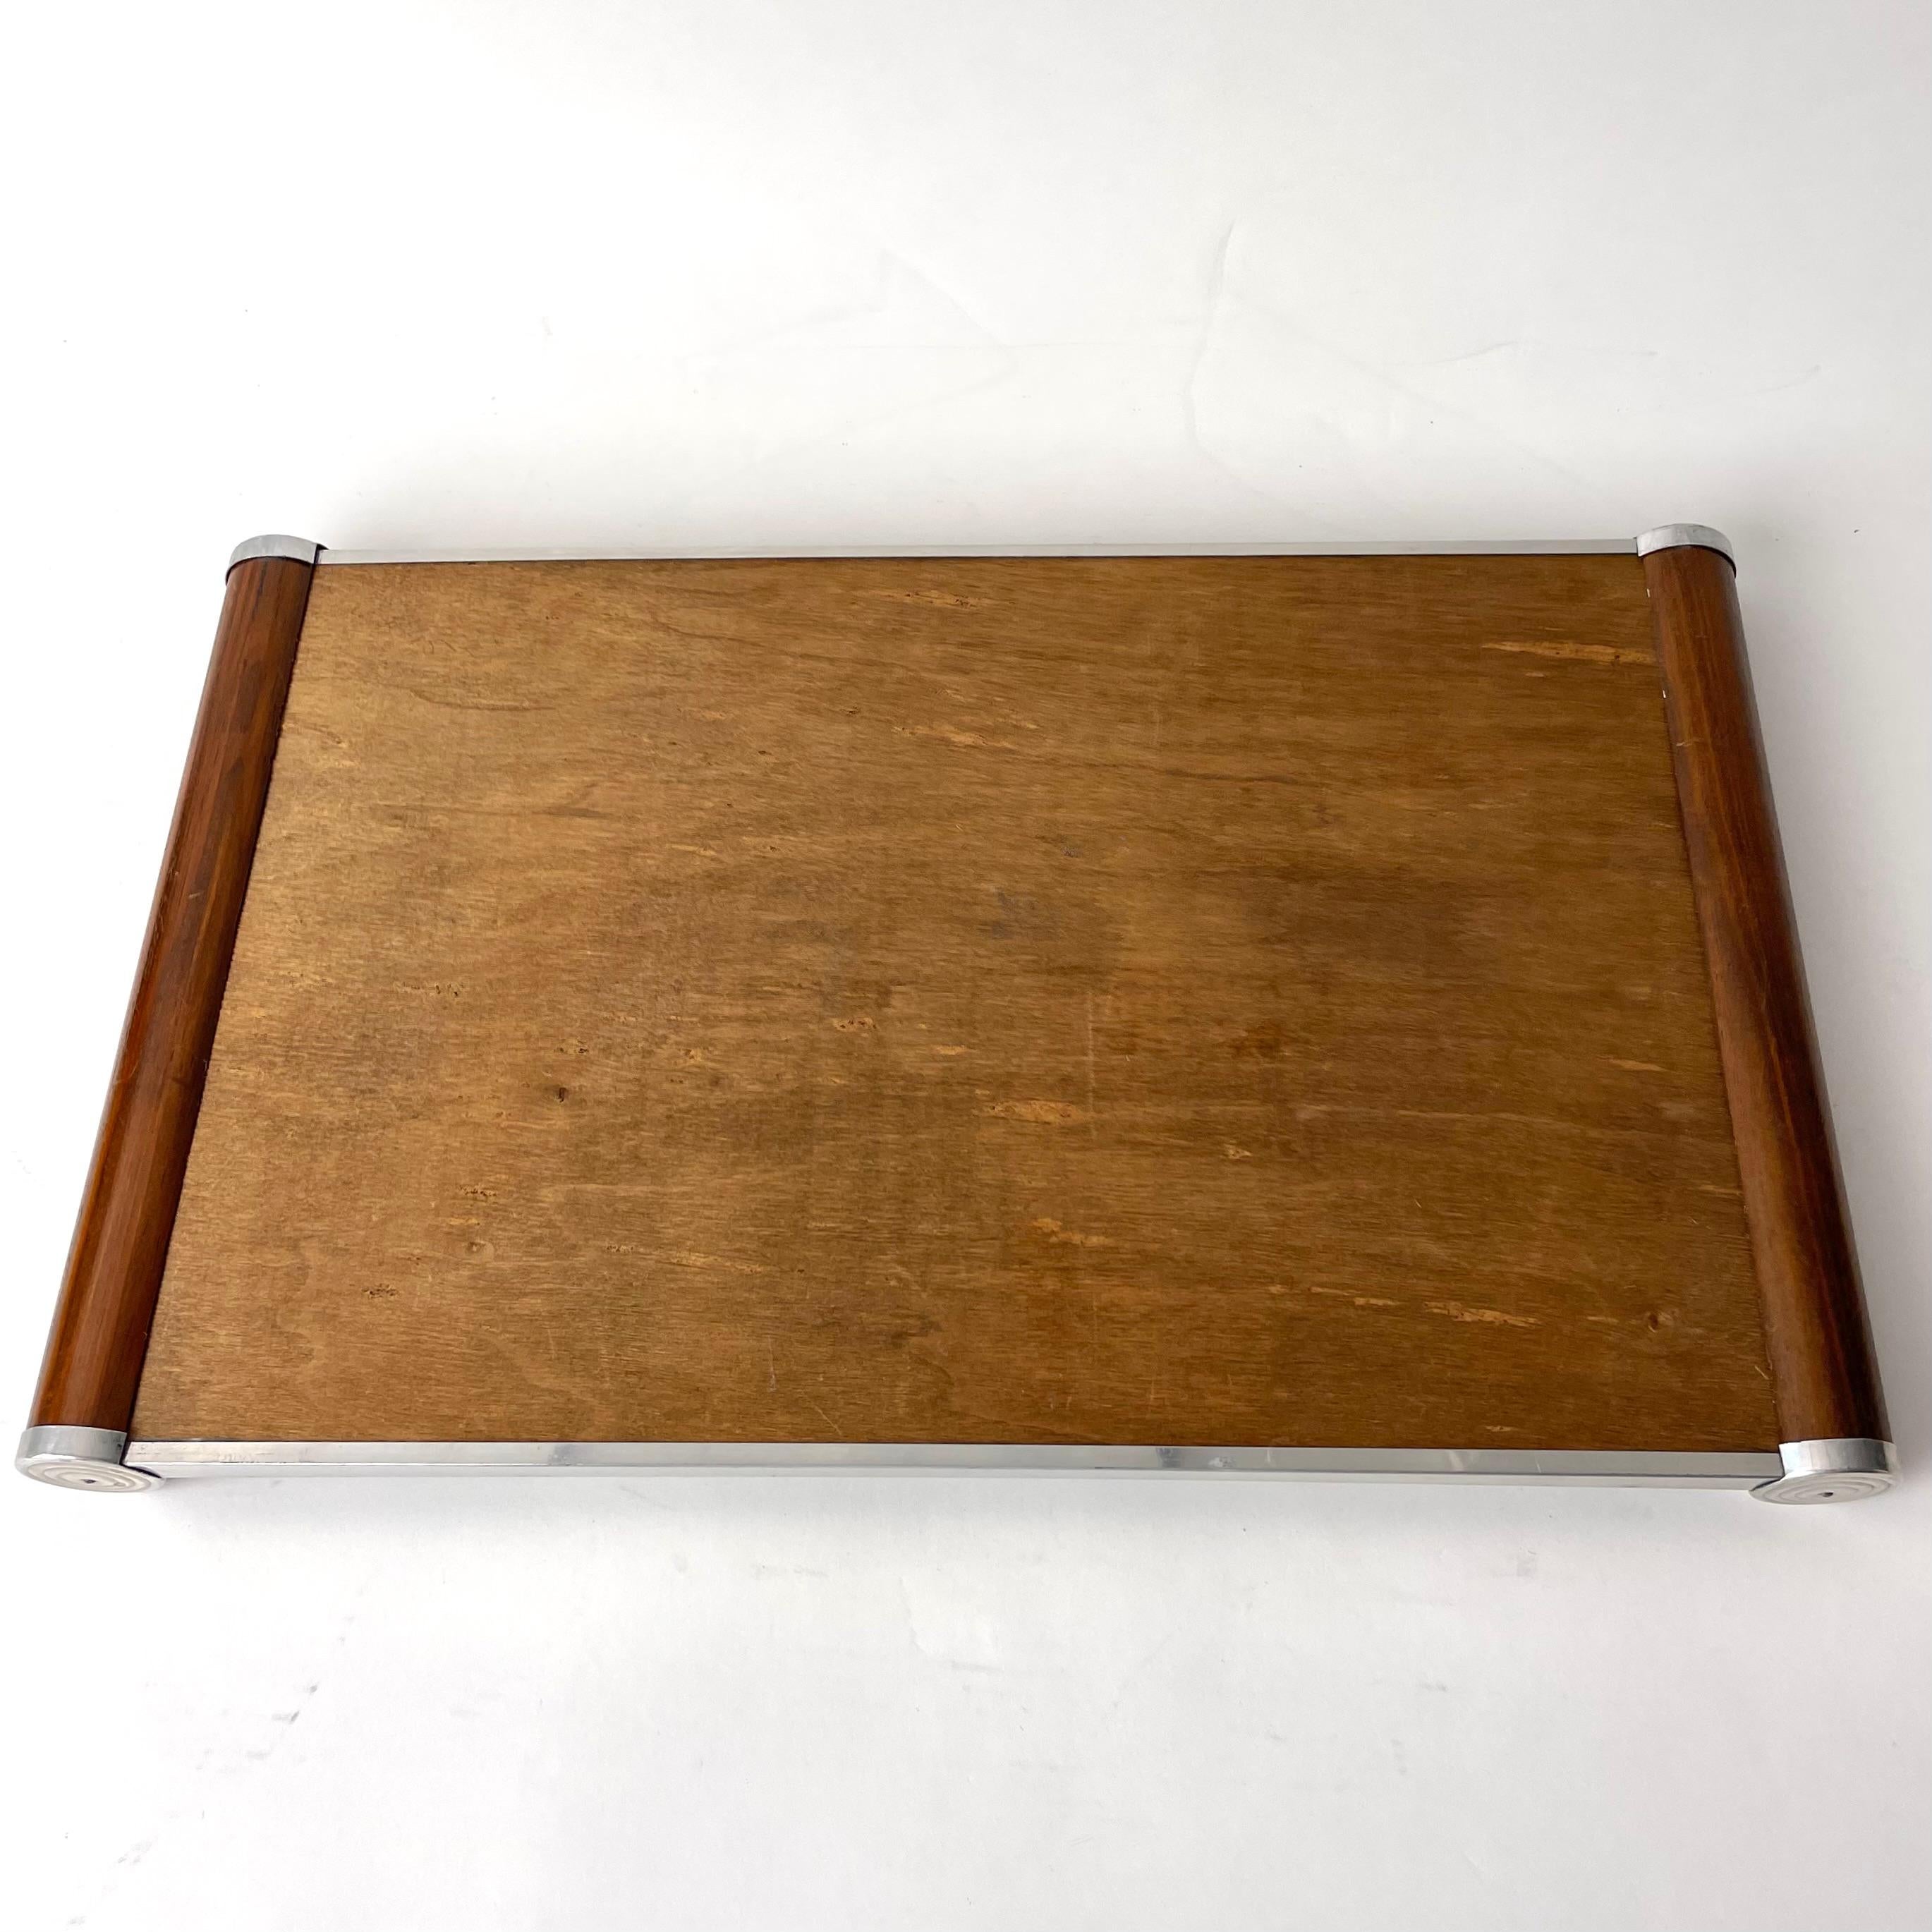 Early 20th Century Art Deco Mirror Tray in Walnut and White Metal, 1920s For Sale